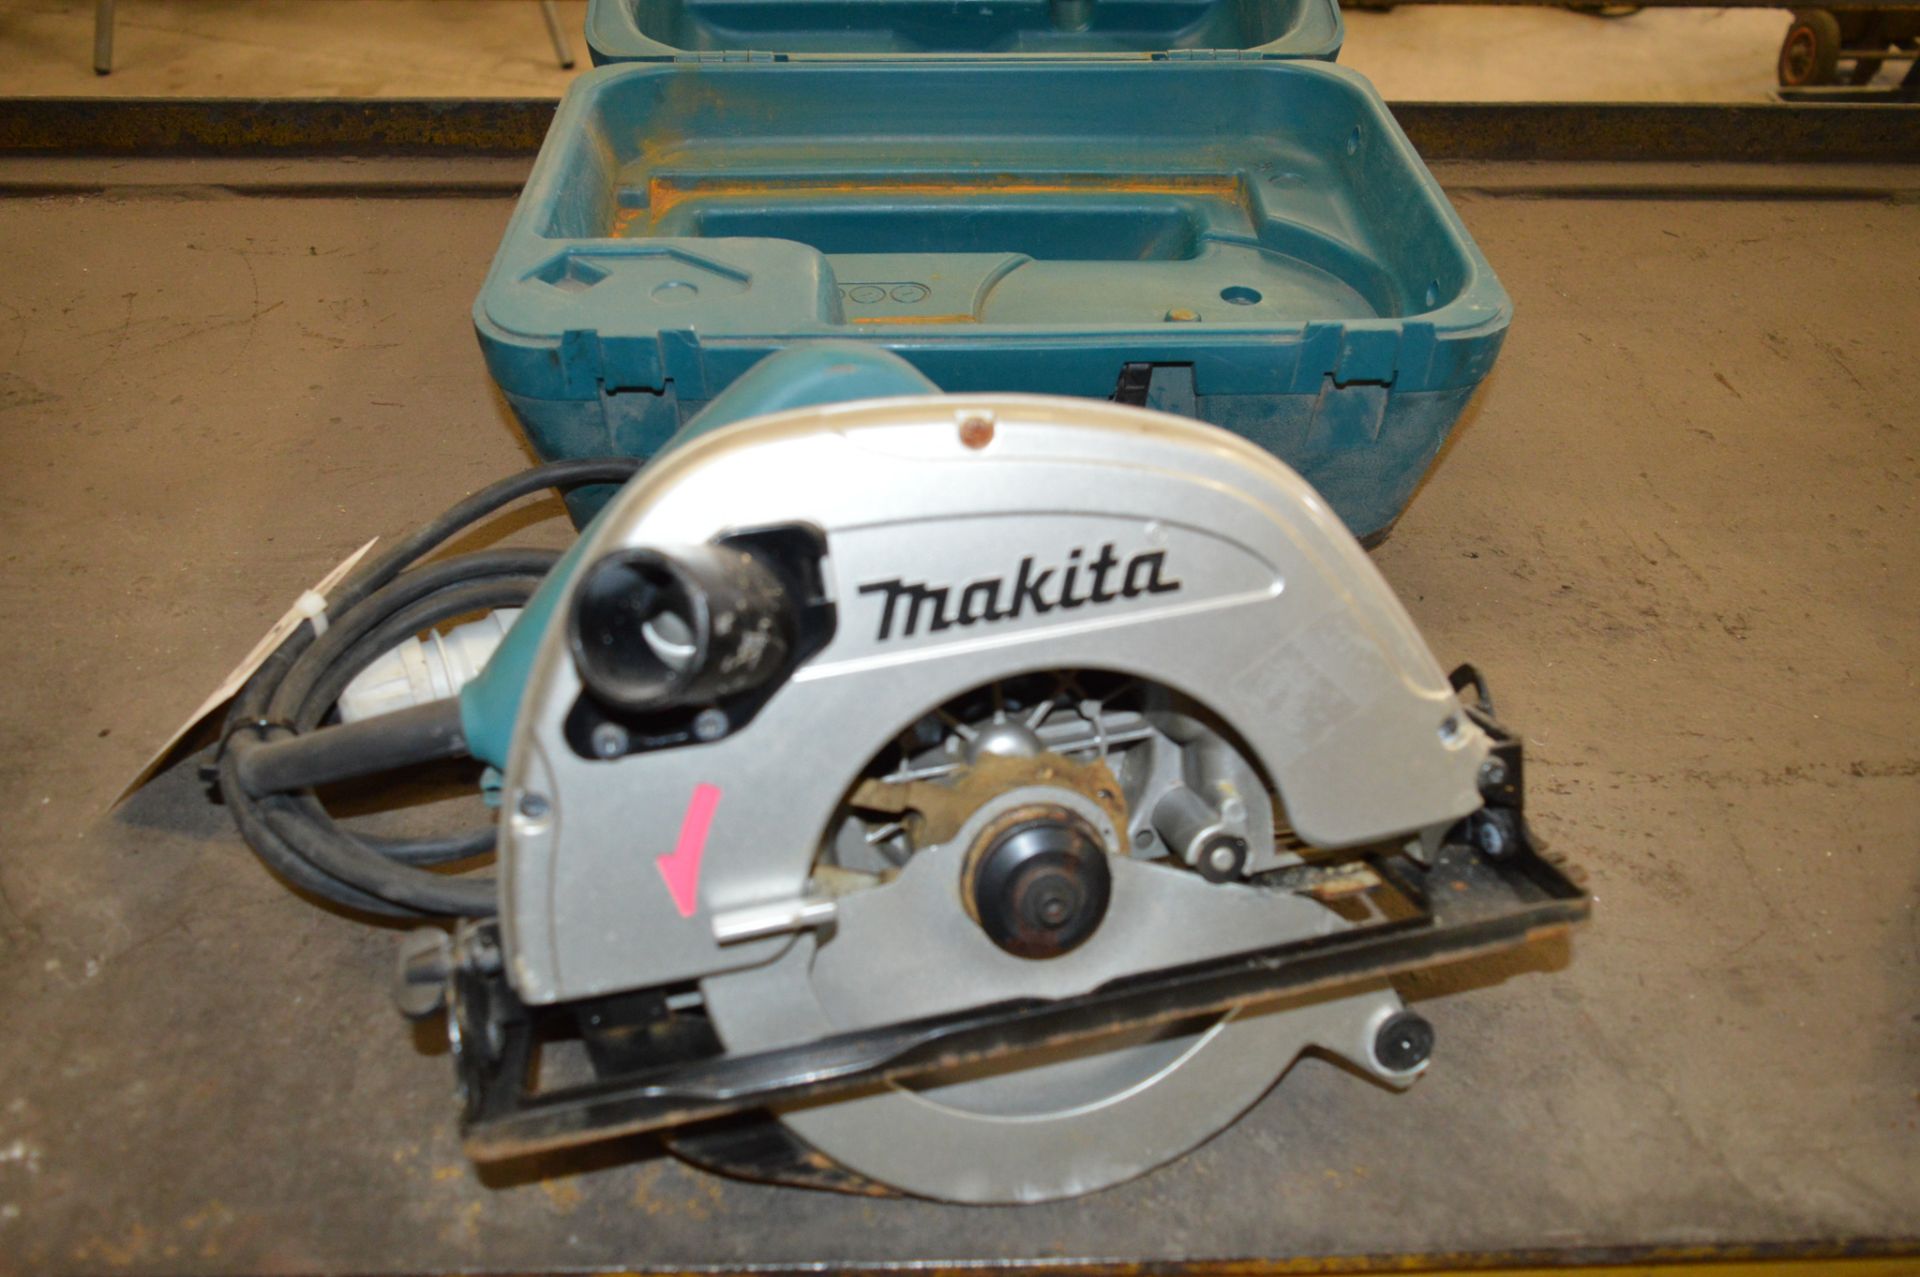 Makita 110v circular saw Model: 5704R c/w carry case Year: 2014 S/N: 670179G ** No VAT on hammer - Image 2 of 3